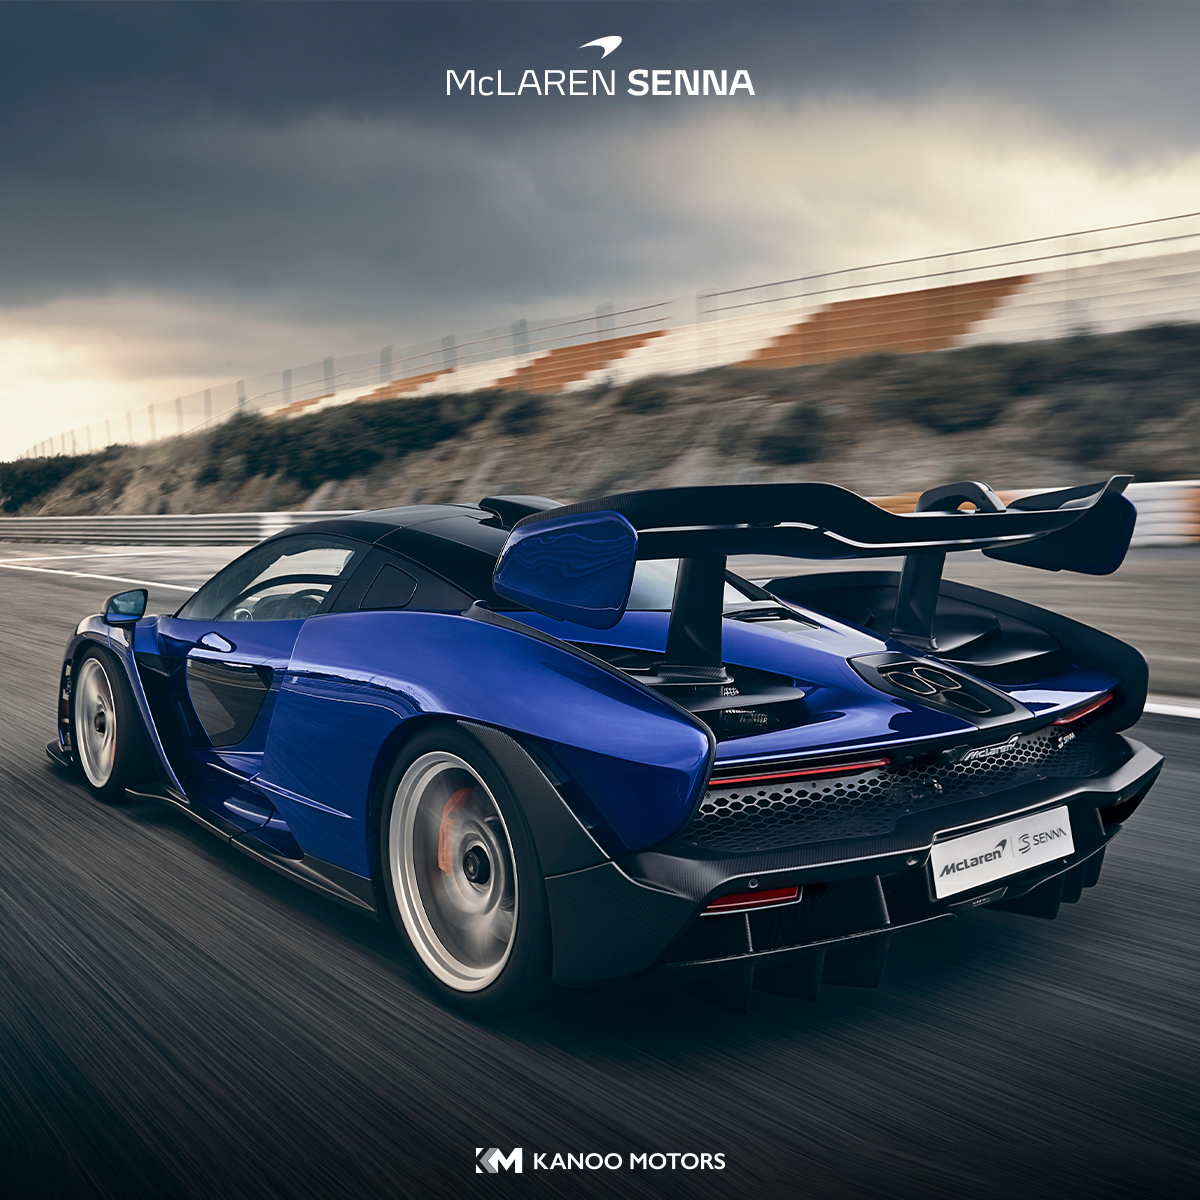 To observe the detailed work that has gone into every aerodynamic element of the McLaren Senna is mesmerising. To experience it all working in unison is truly incredible. #Senna #McLarenBahrain #KanooMotors